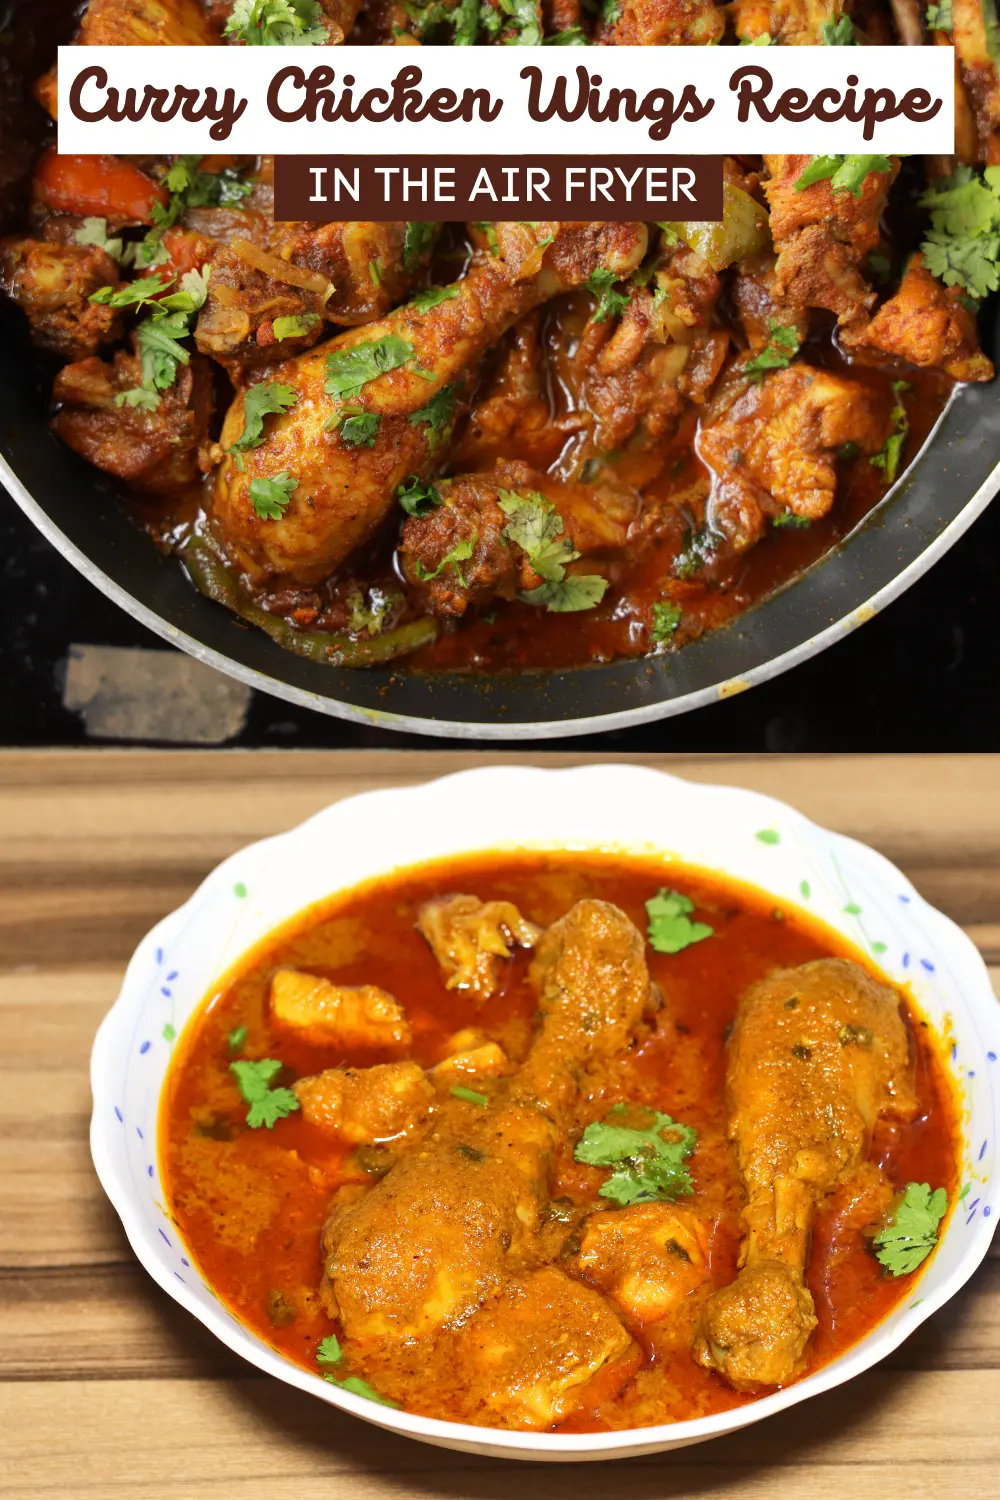 How To Make the Best Curry Chicken Wings Recipe